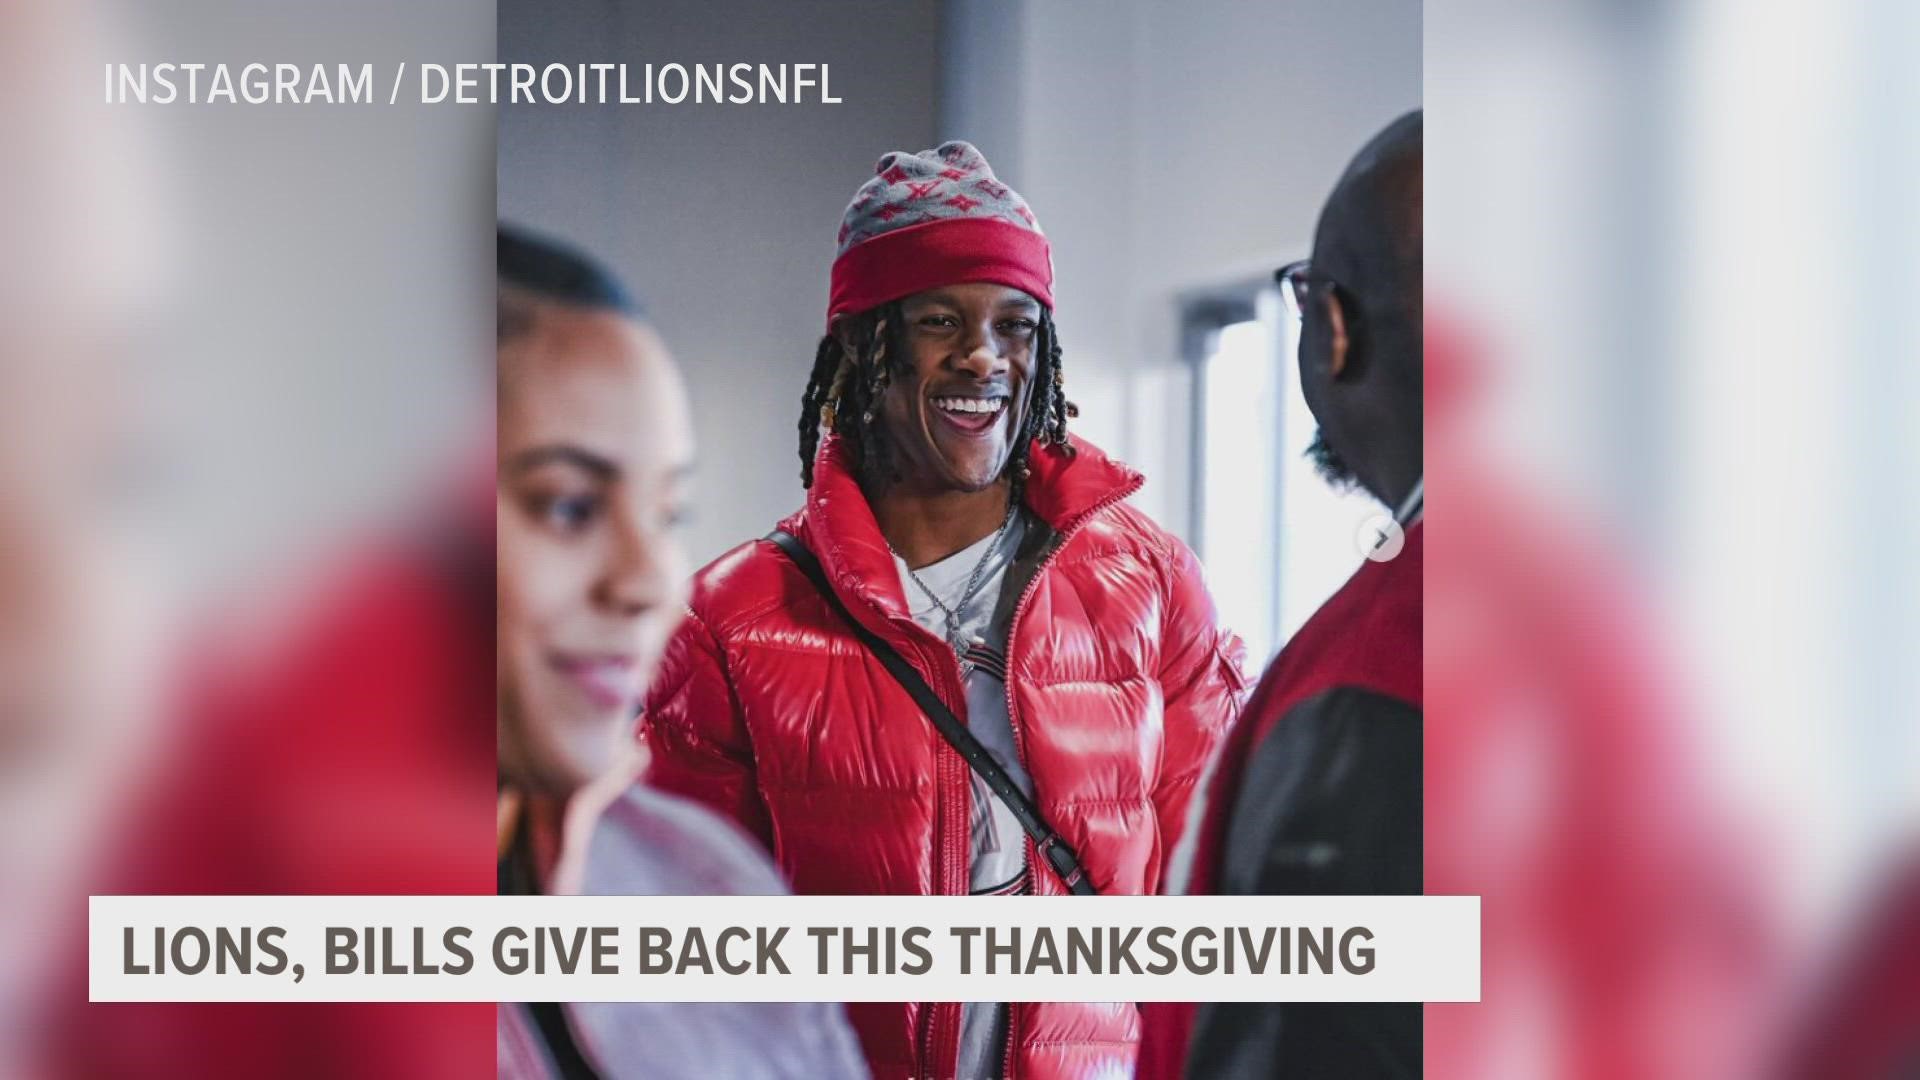 Williams handed out 100 turkeys Wednesday with the help of his parents.